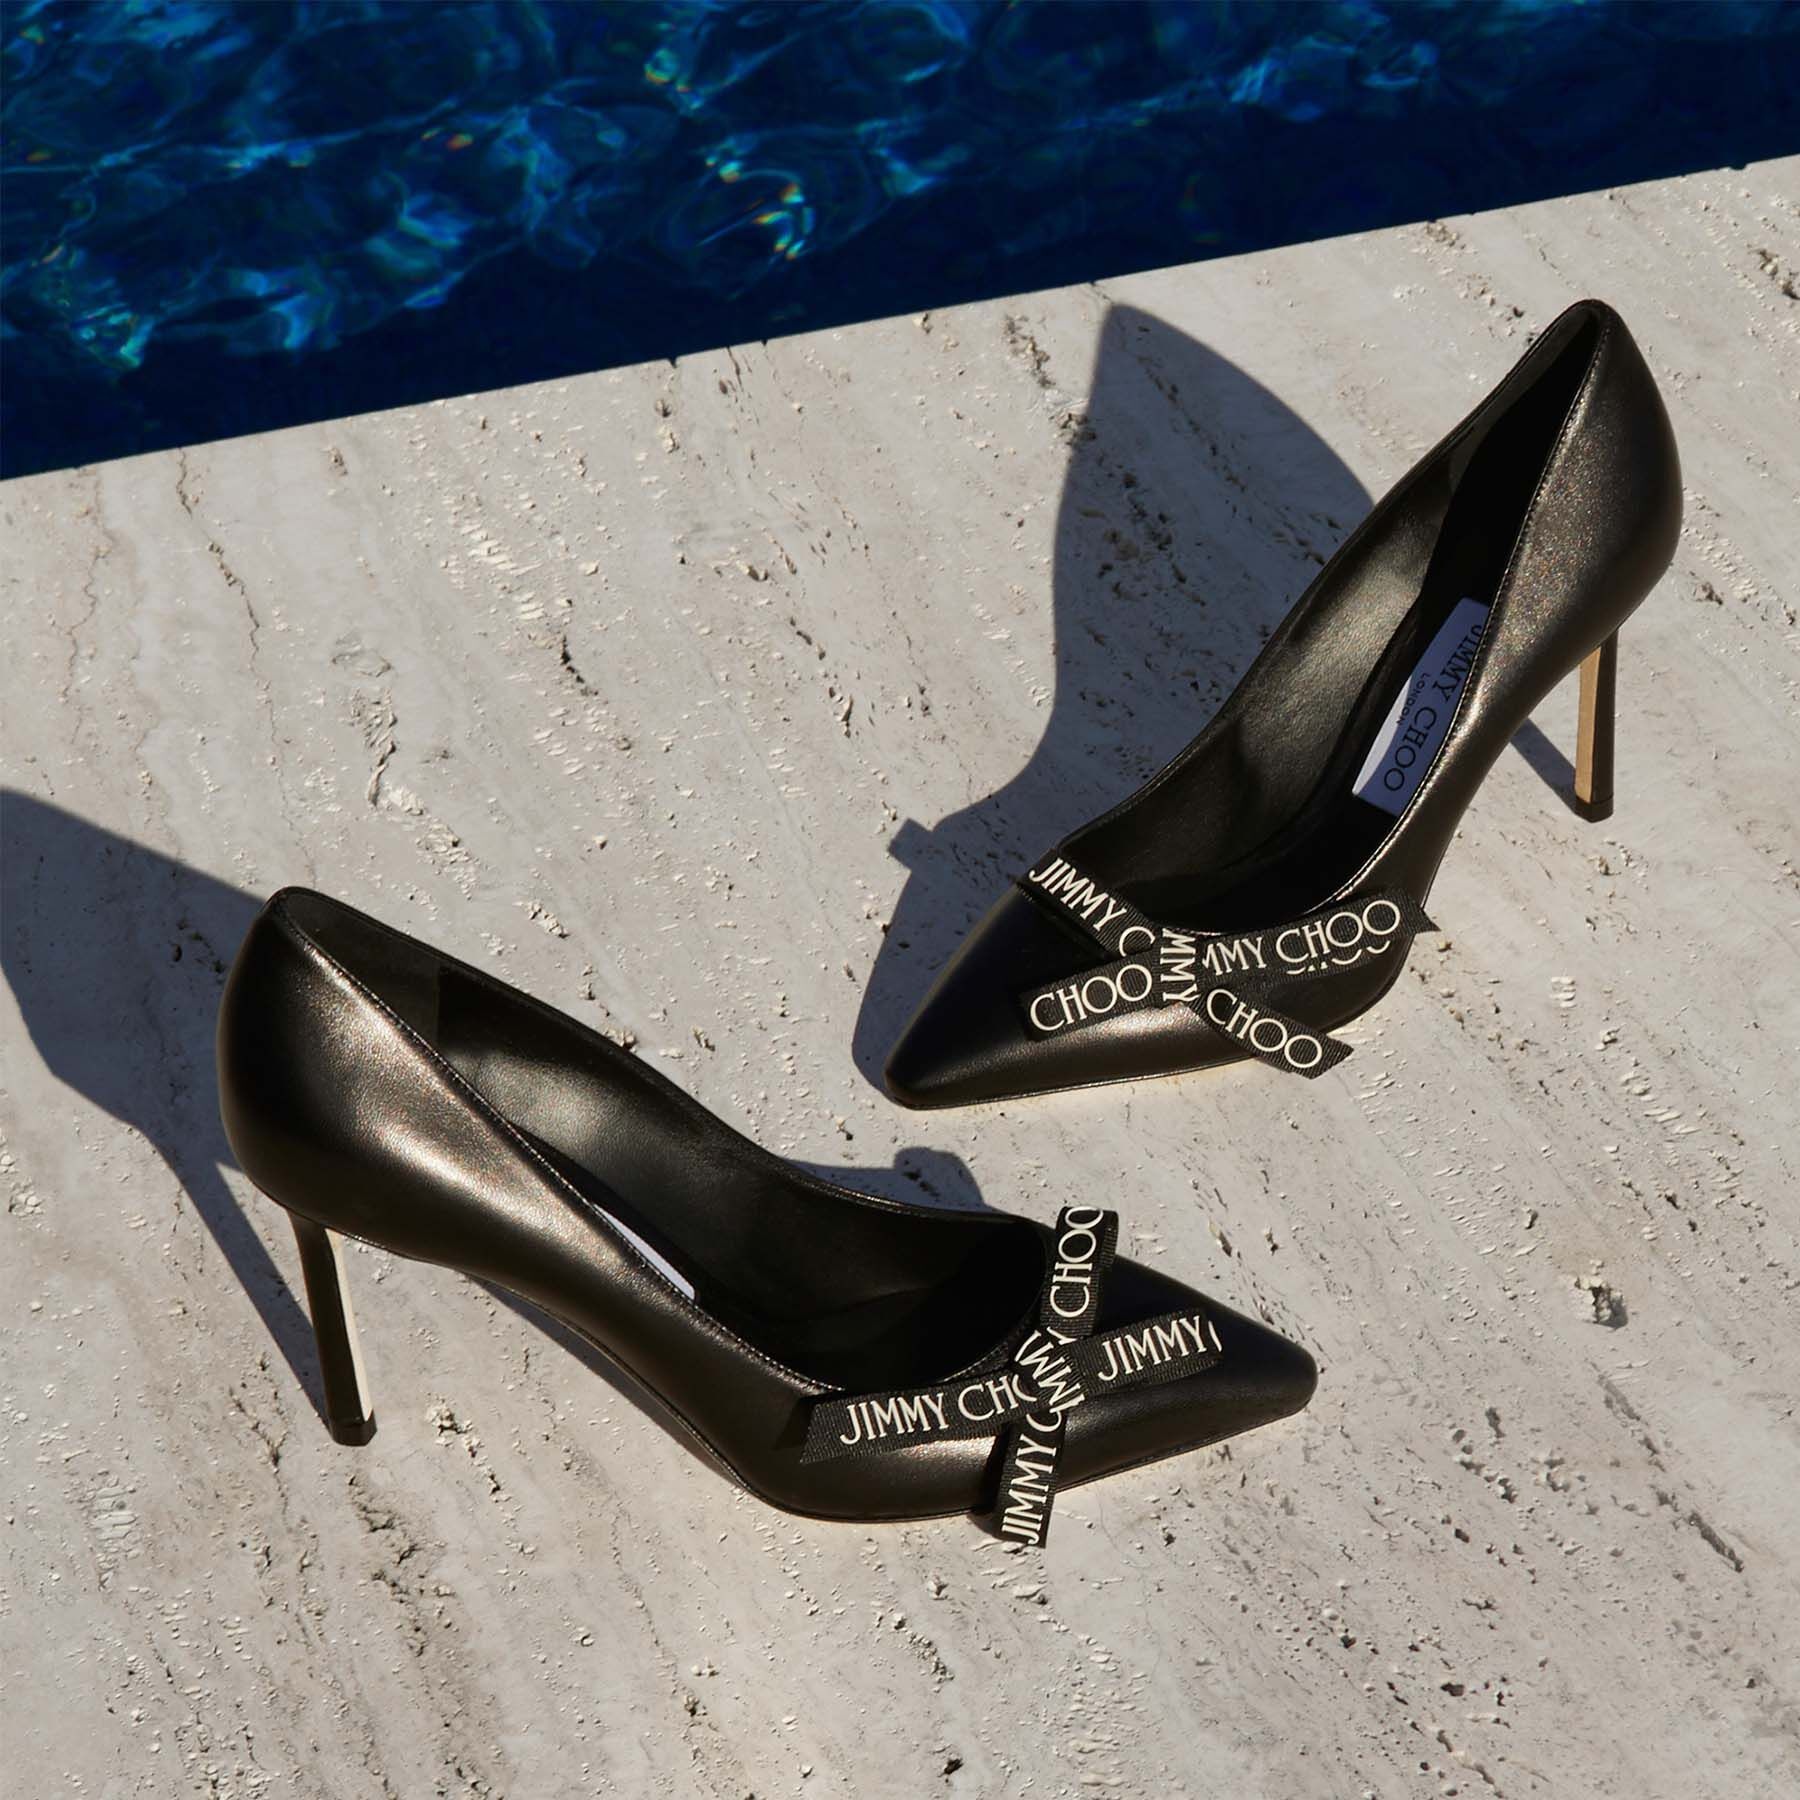 Romy 85
Black Nappa Leather Pumps with Jimmy Choo Bow - 7